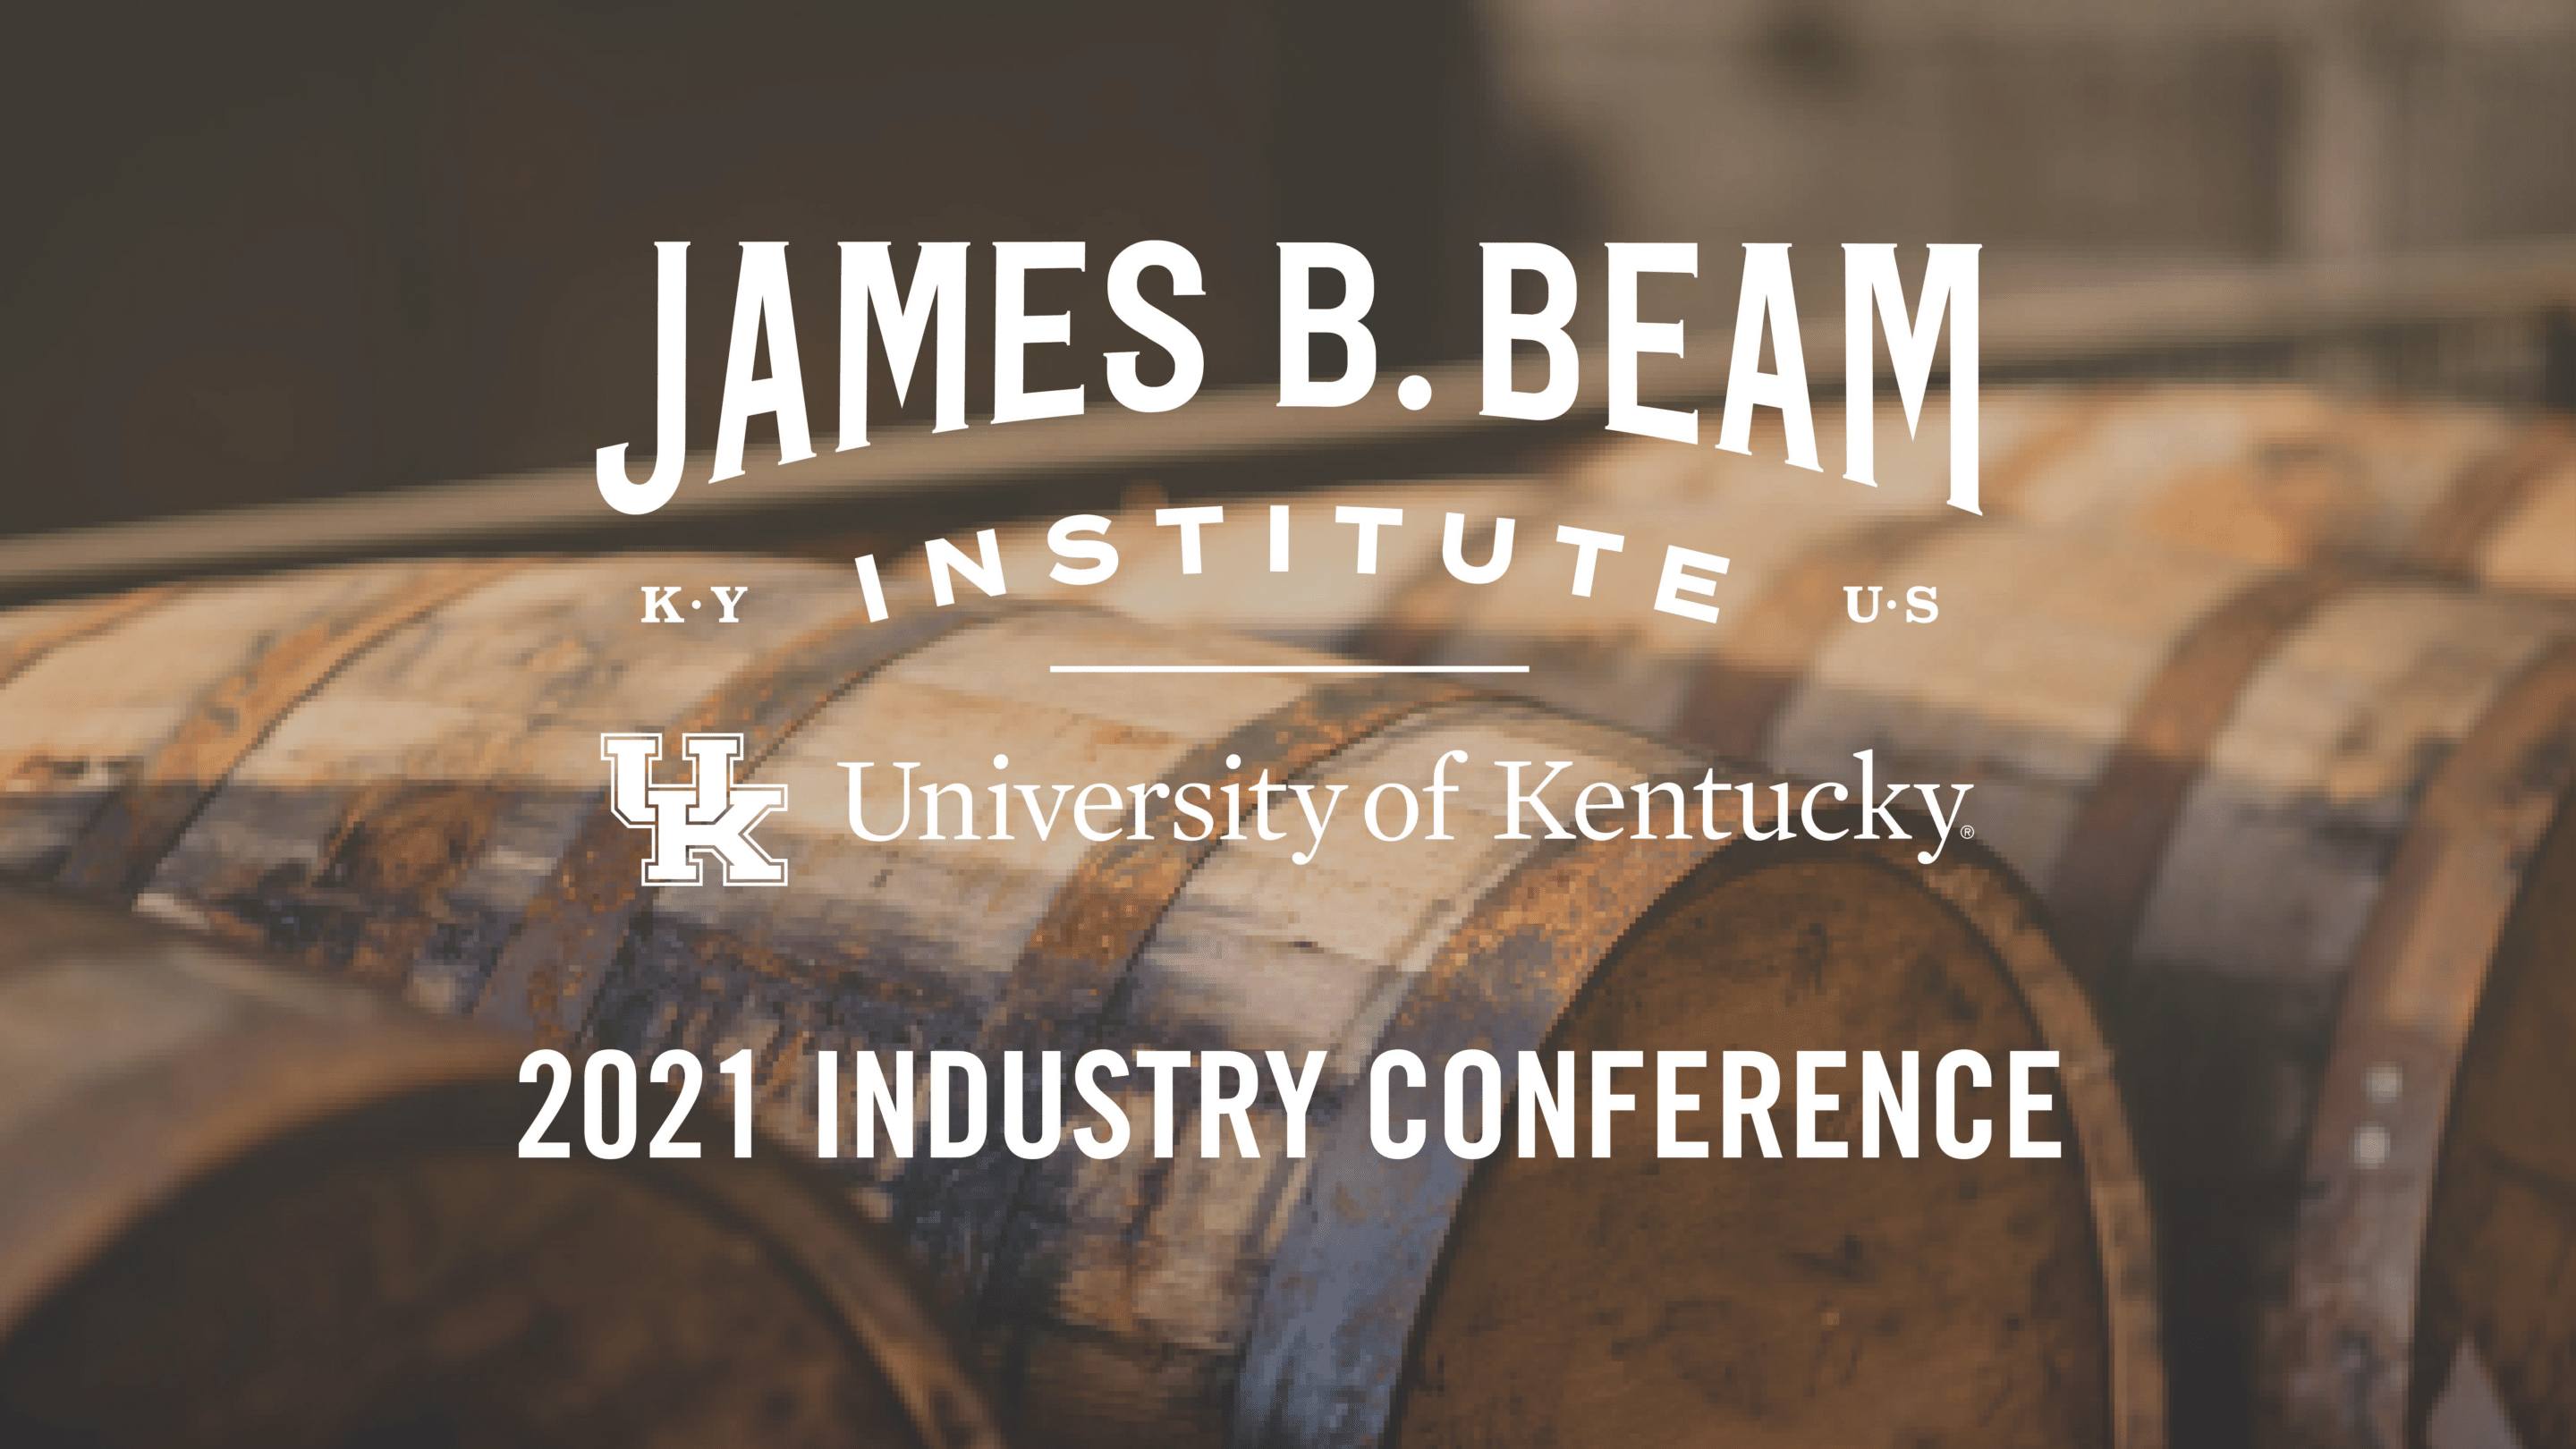 March 10-12, 2021 – The second annual James B. Beam Institute Industry Conference